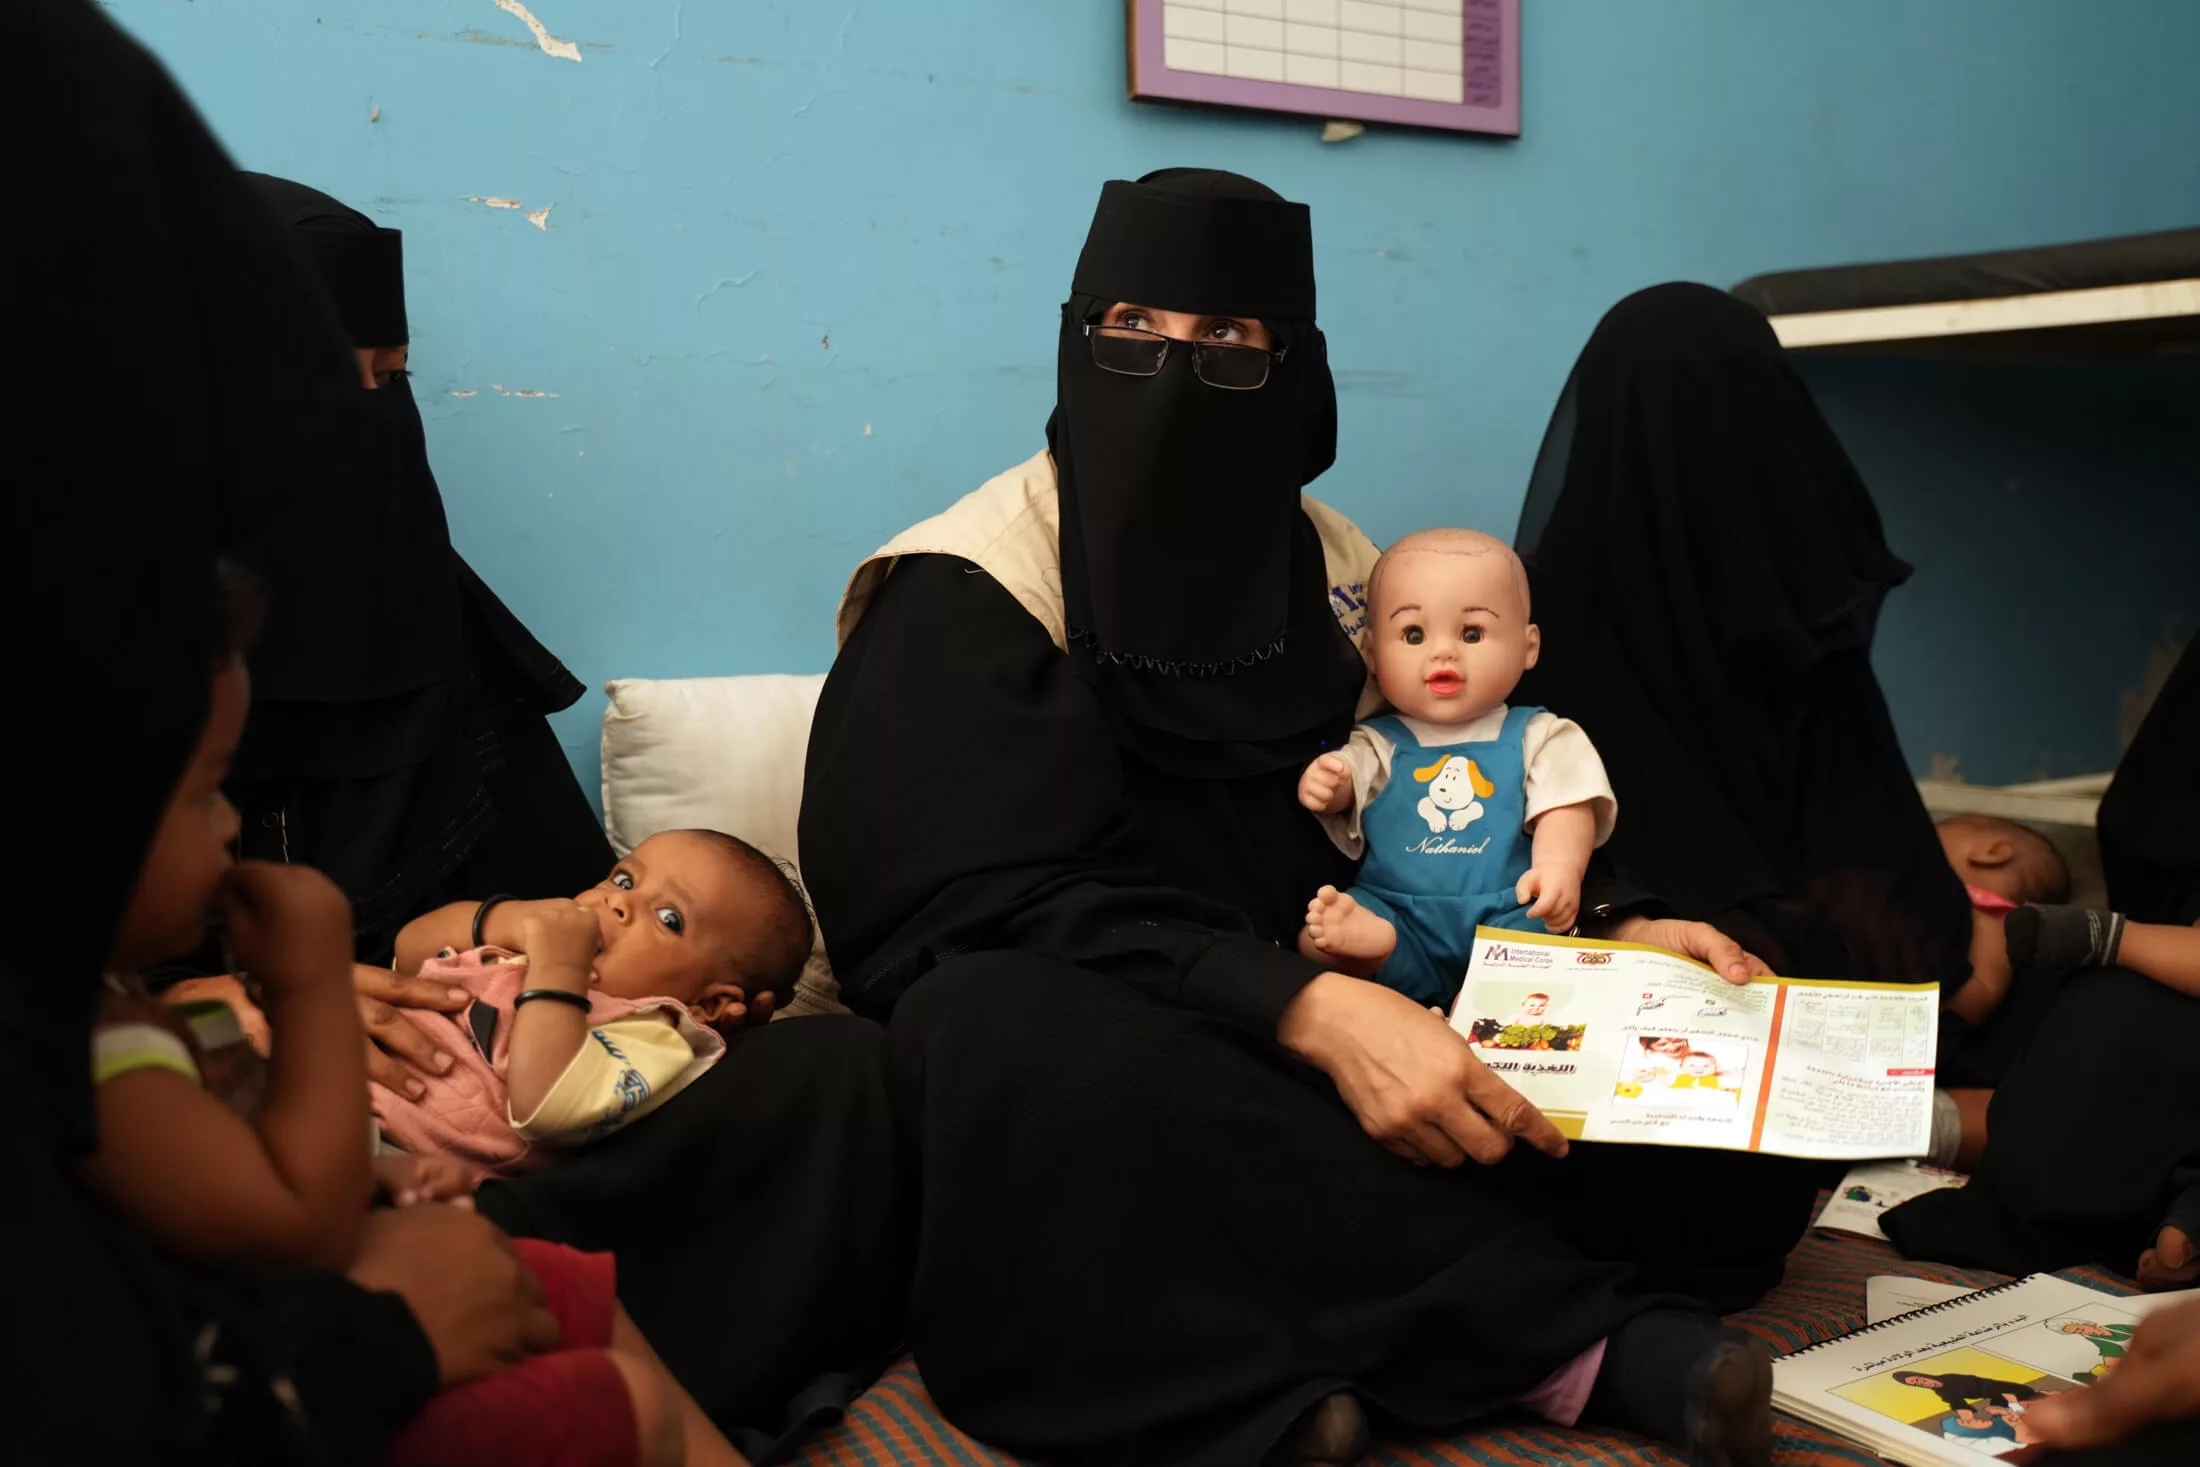 Health worker Hameedah Ali Mohammed Zambeel Hashed teaches mothers about complementary feeding, which involves providing children more than 6 months old with food as well as breastmilk.